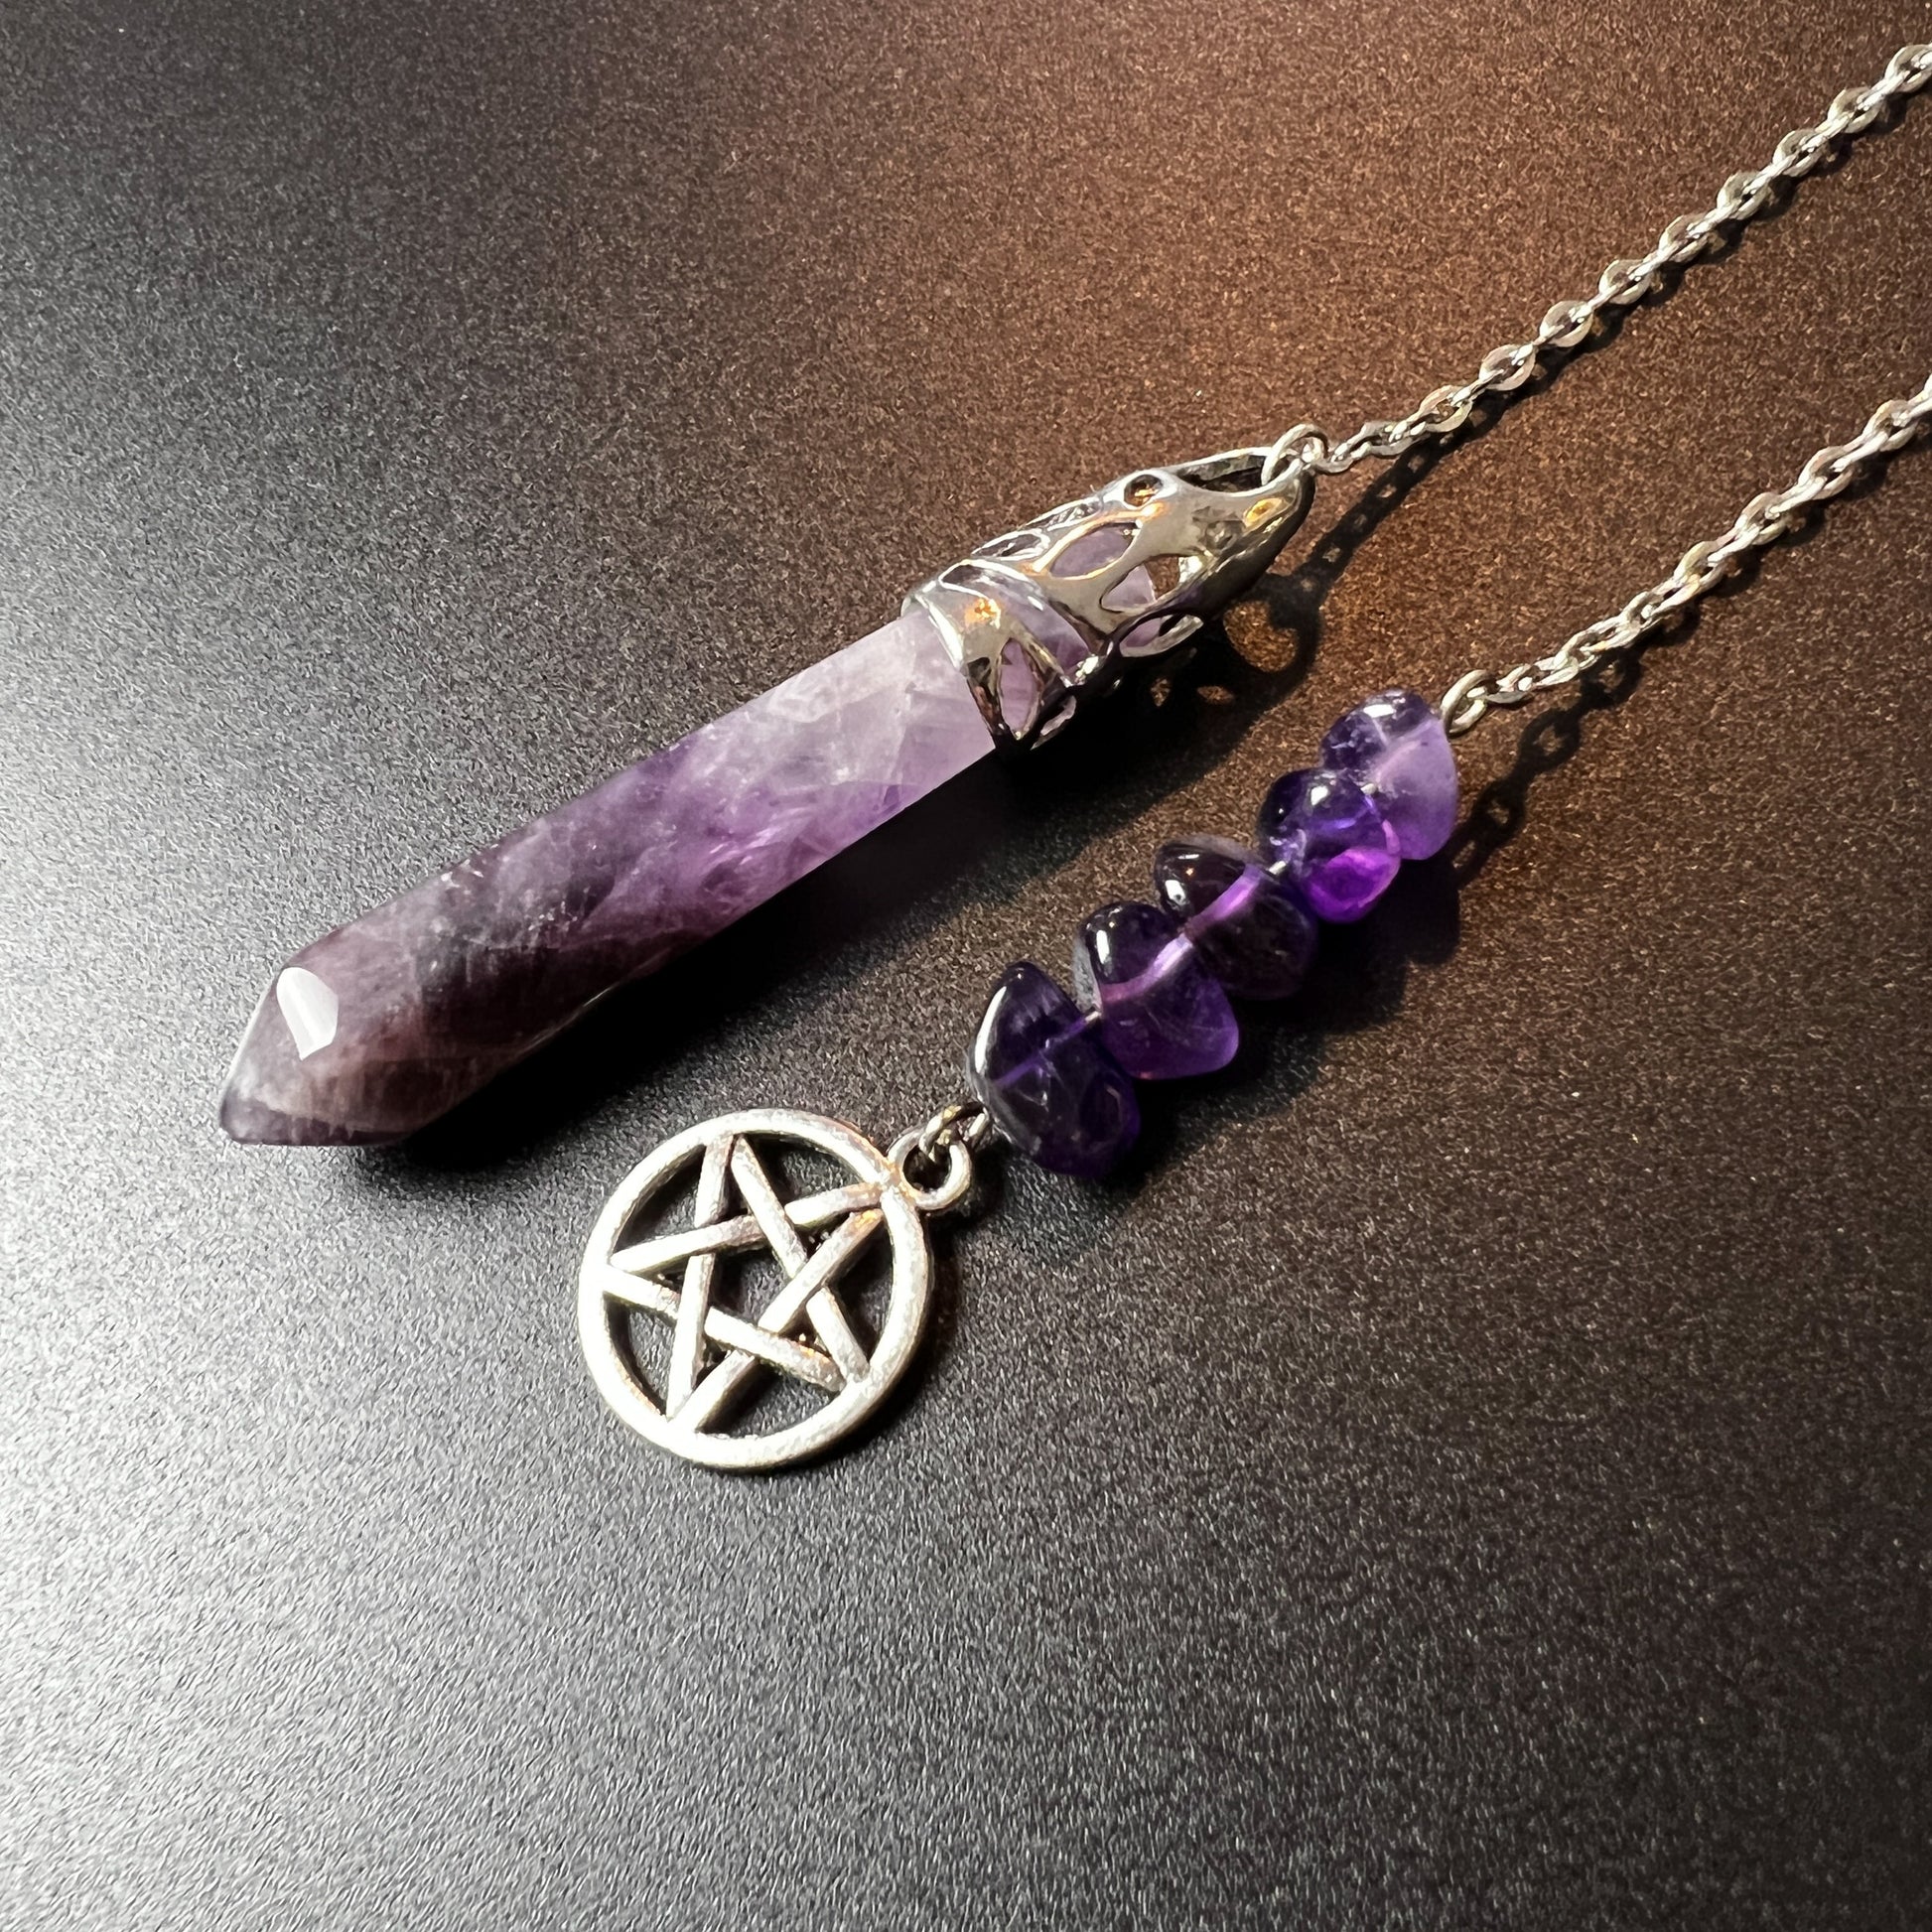 Amethyst and pentacle pendulum - The French Witch shop